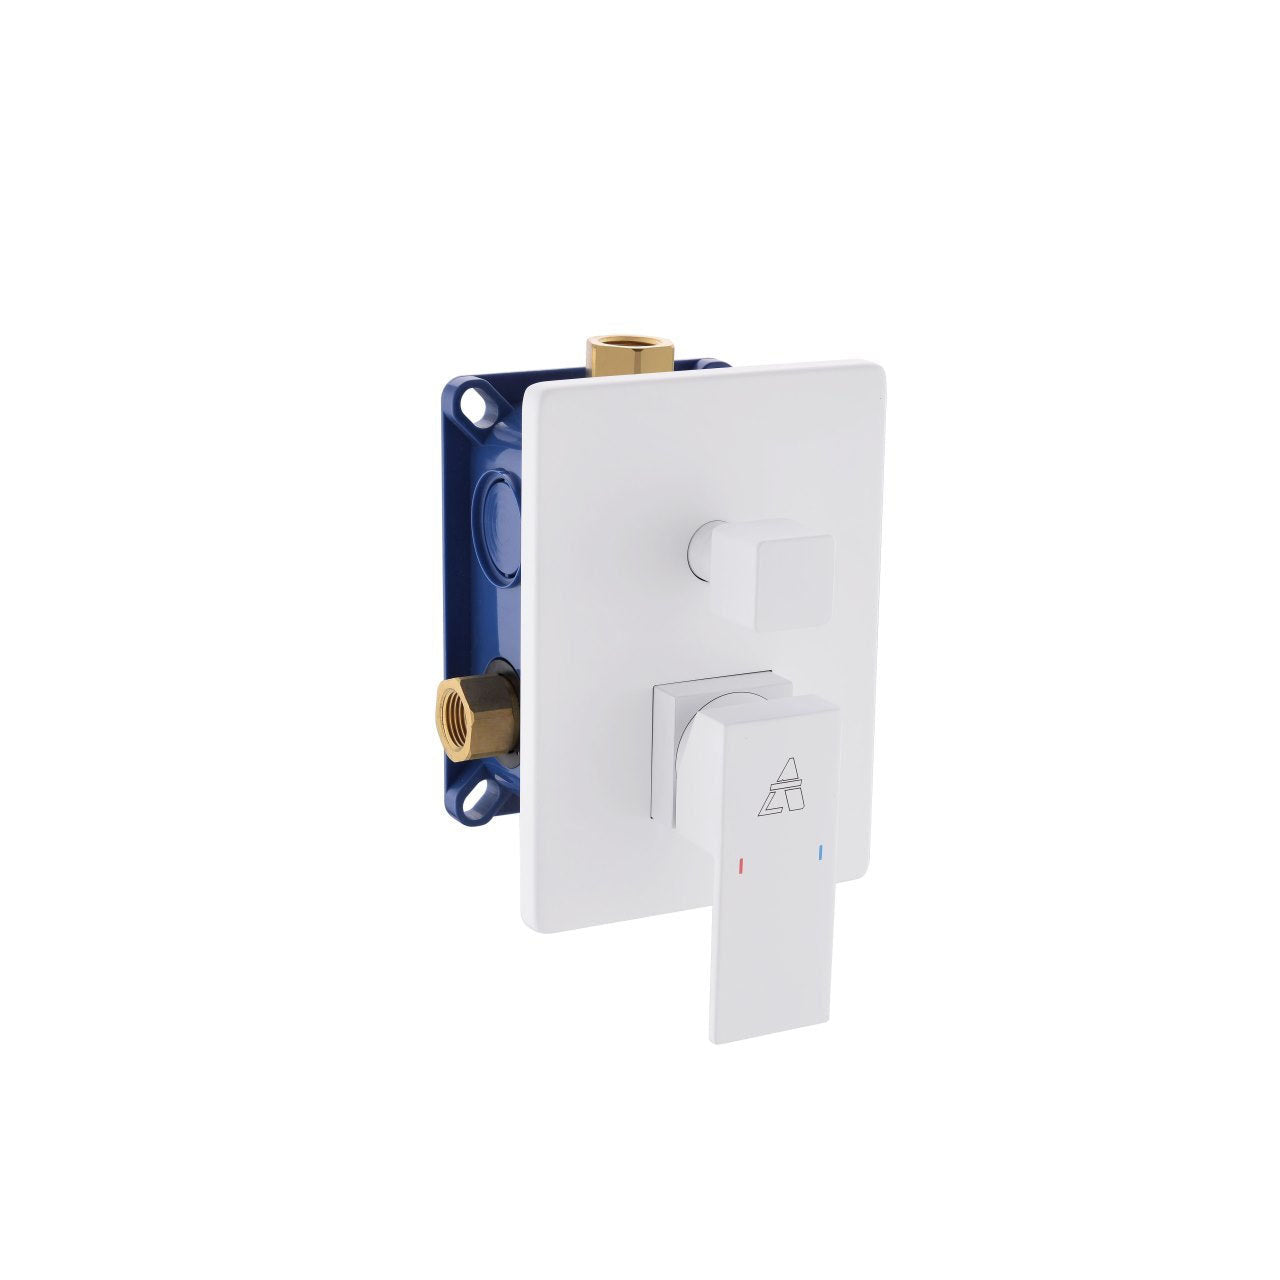 Aqua Piazza 2-Way Rough-In Valve With Cover Plate, Handle and Diverter - Bhdepot 